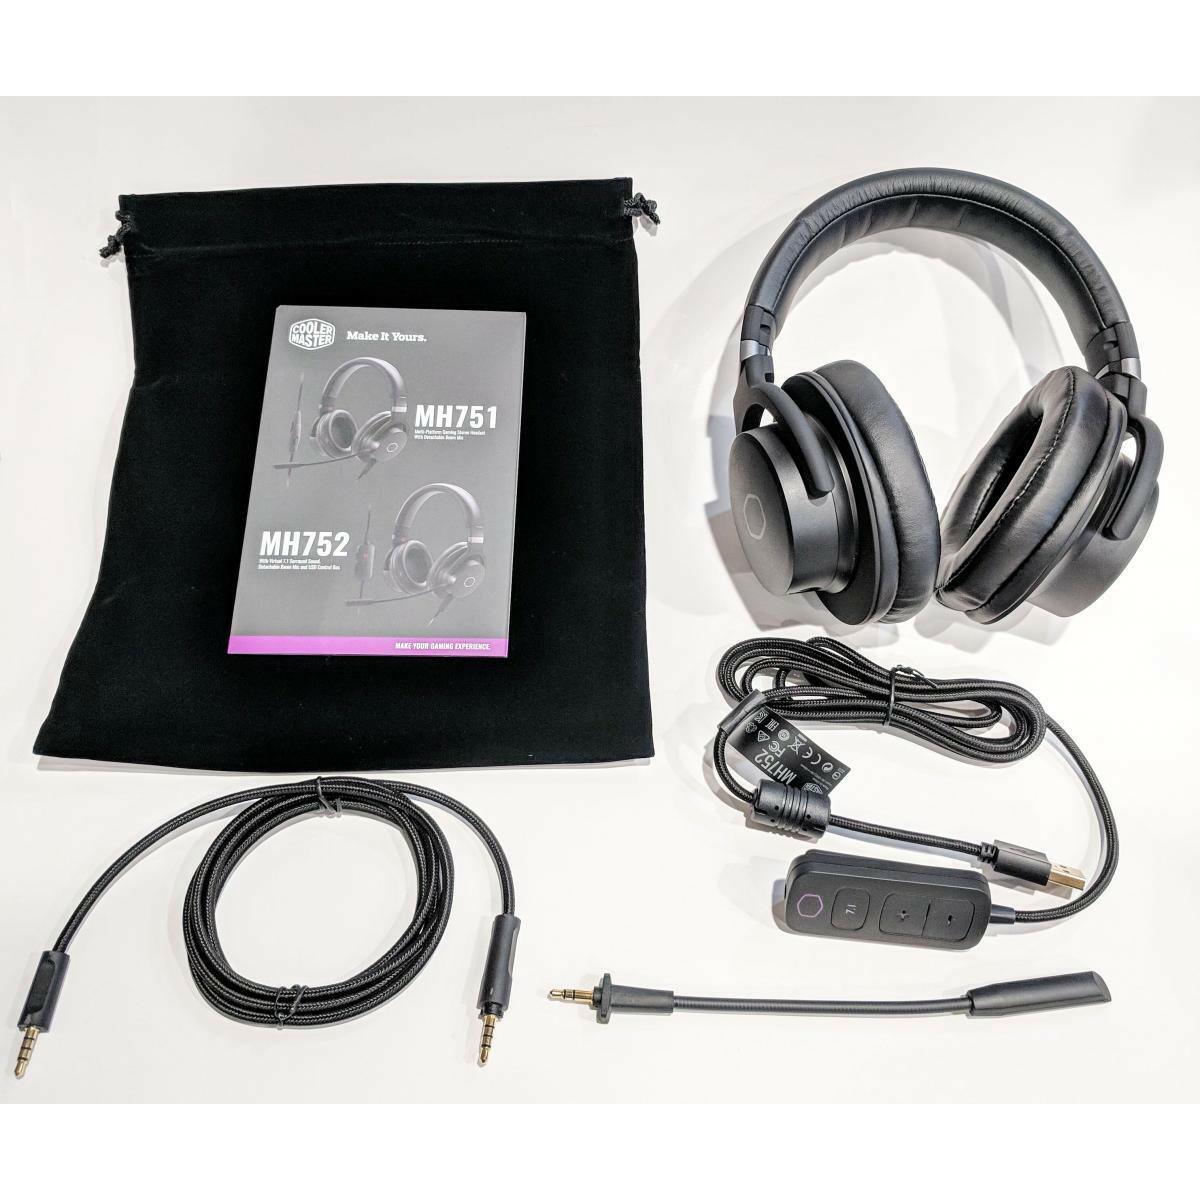 COOLER MASTER GAMING HEADSET Cooler Master MH752 Gaming Headset with Virtual 7.1 Surround Sound